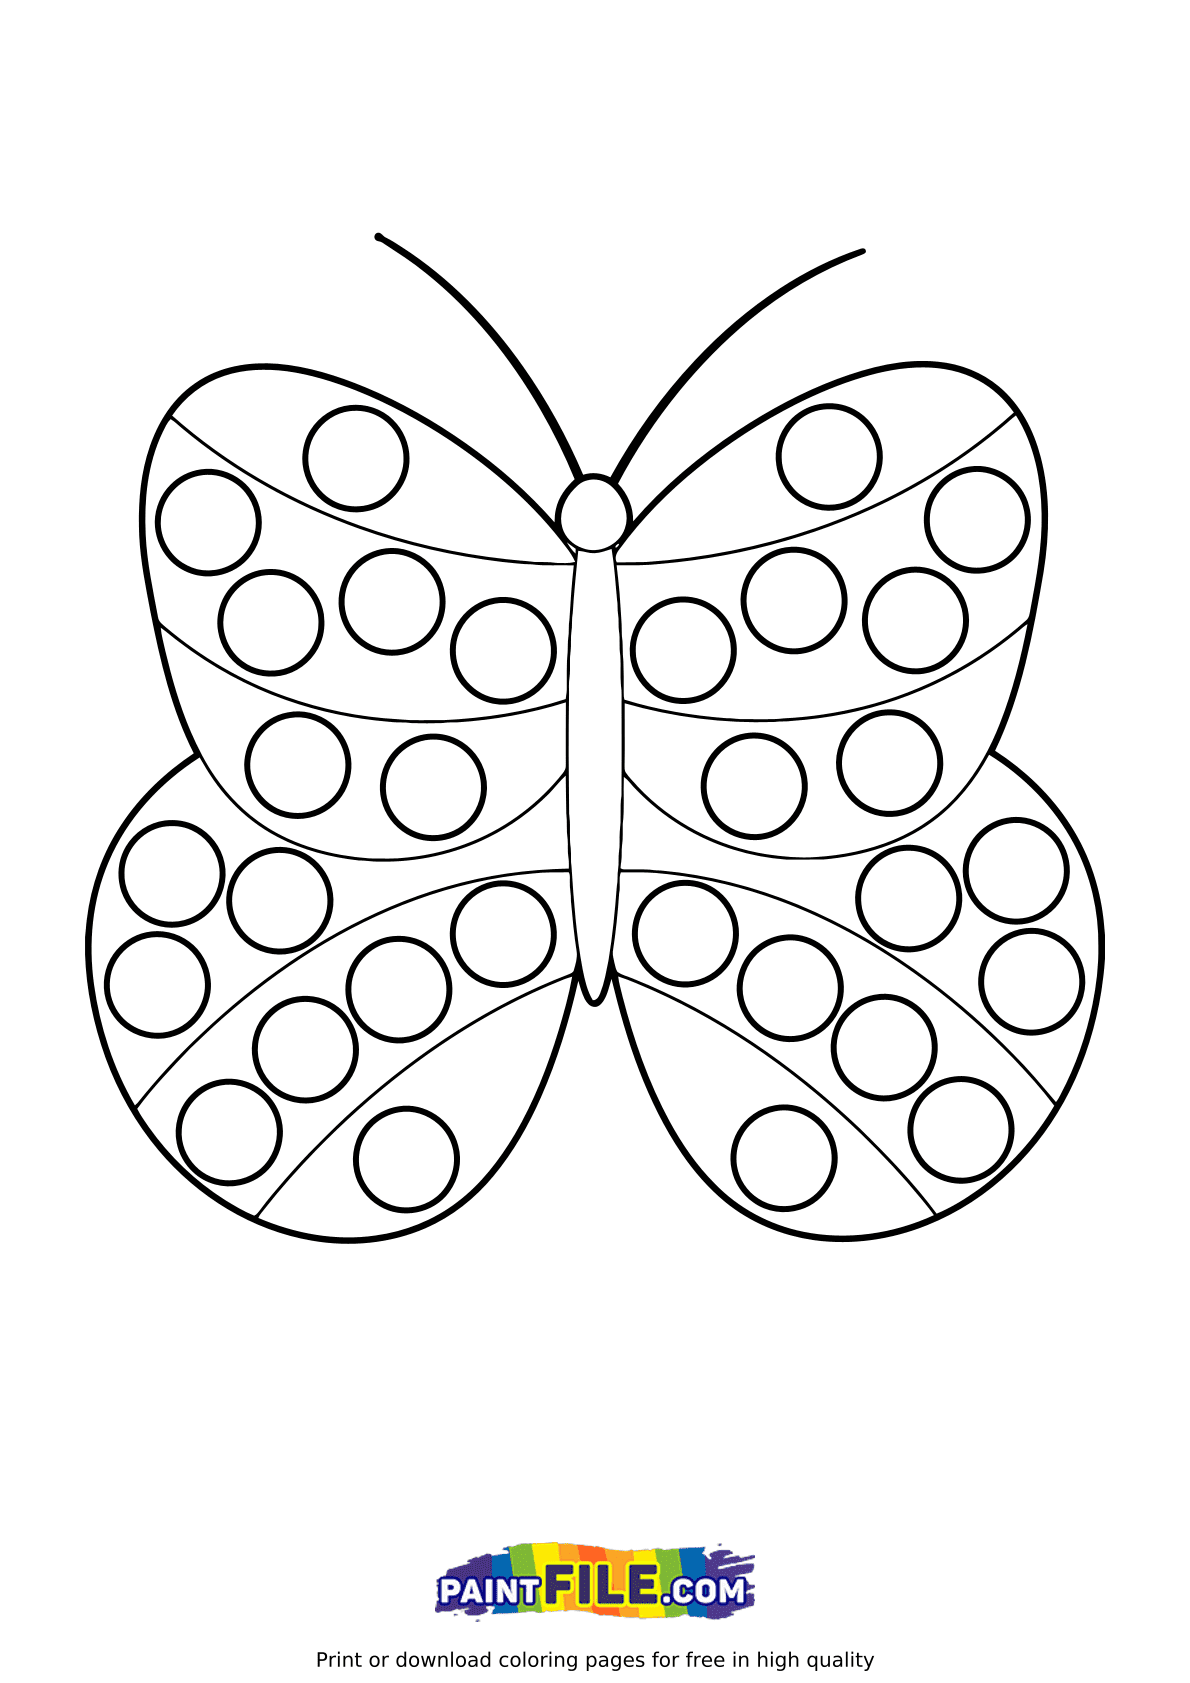 Pop it Yellow Butterfly Coloring Page